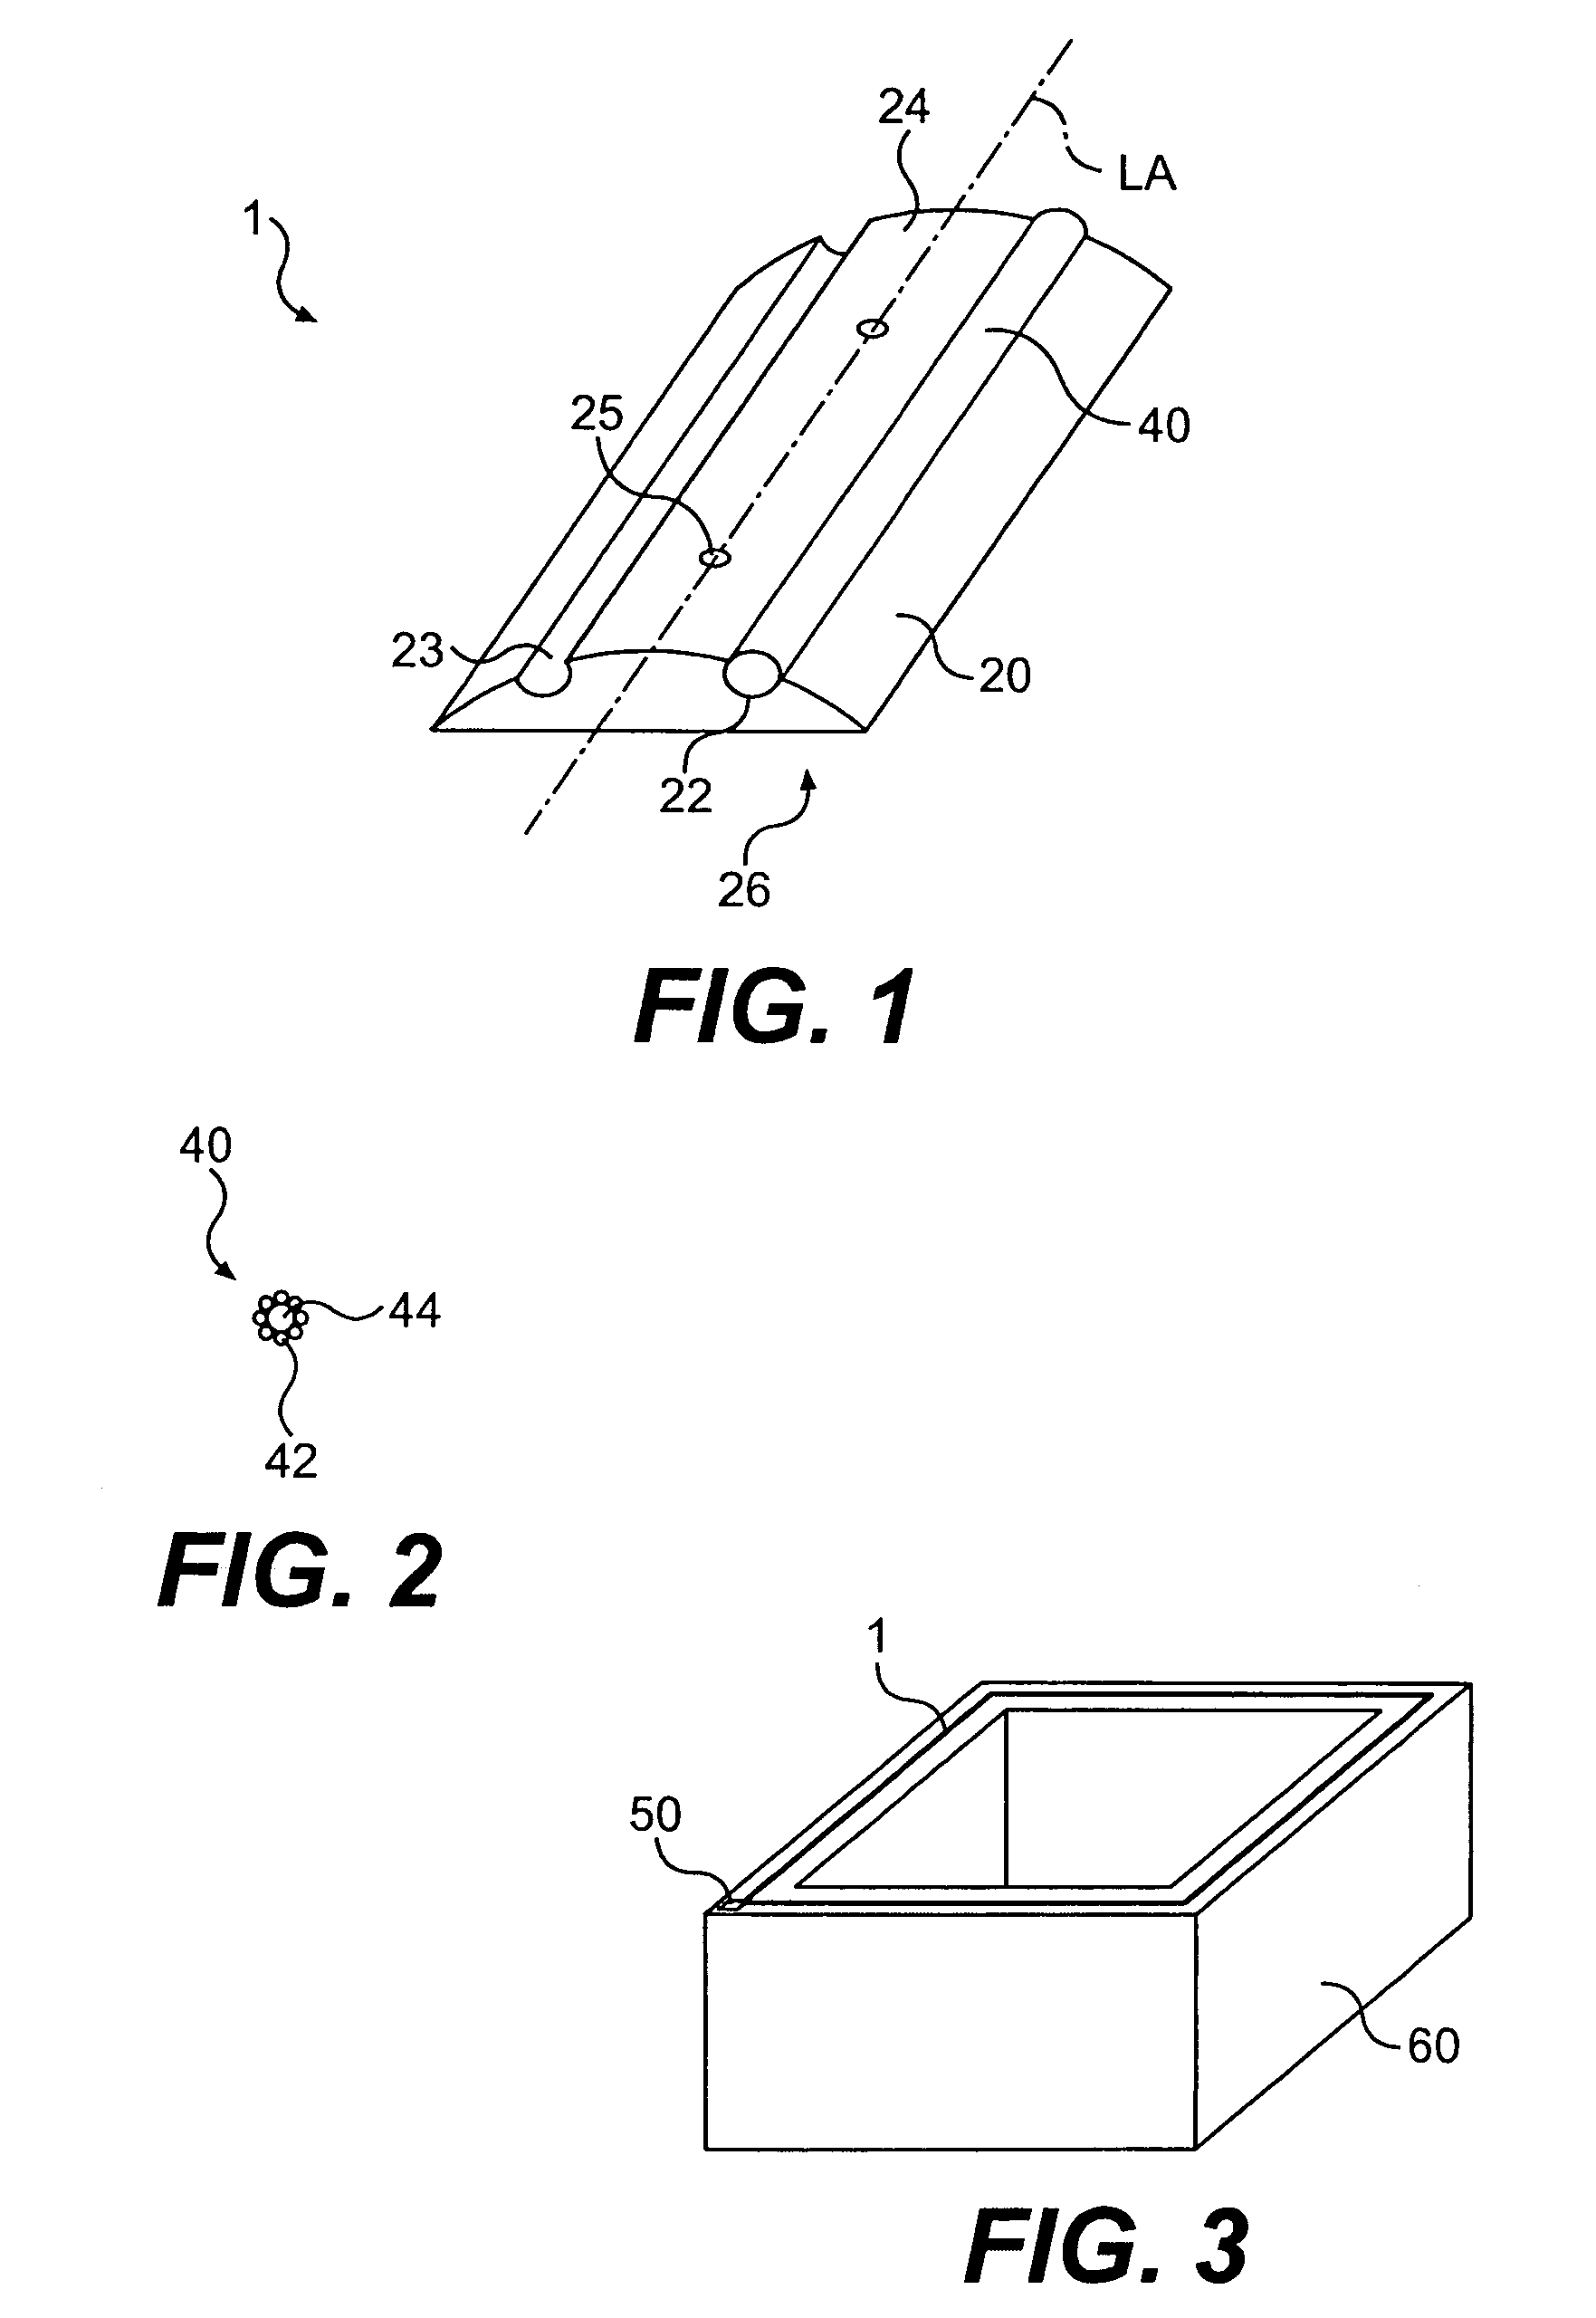 Anti-roosting device